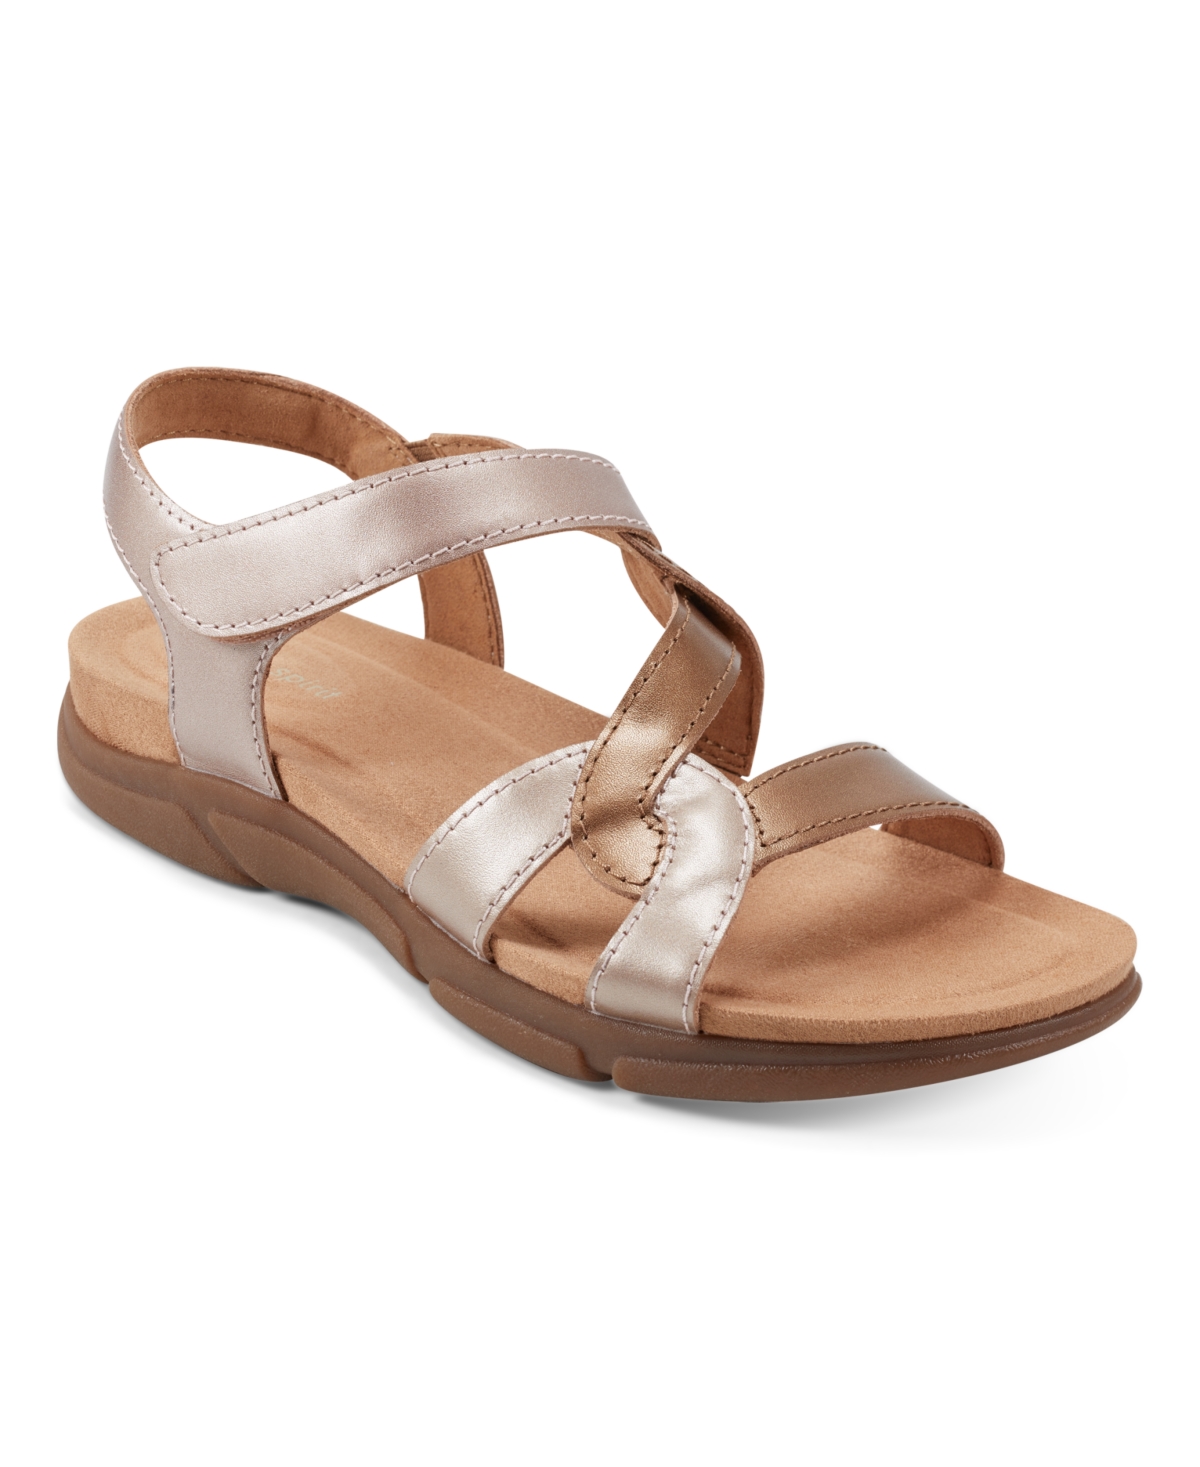 Women's Minny Round Toe Casual Flat Sandals - Rose Gold Multi Leather